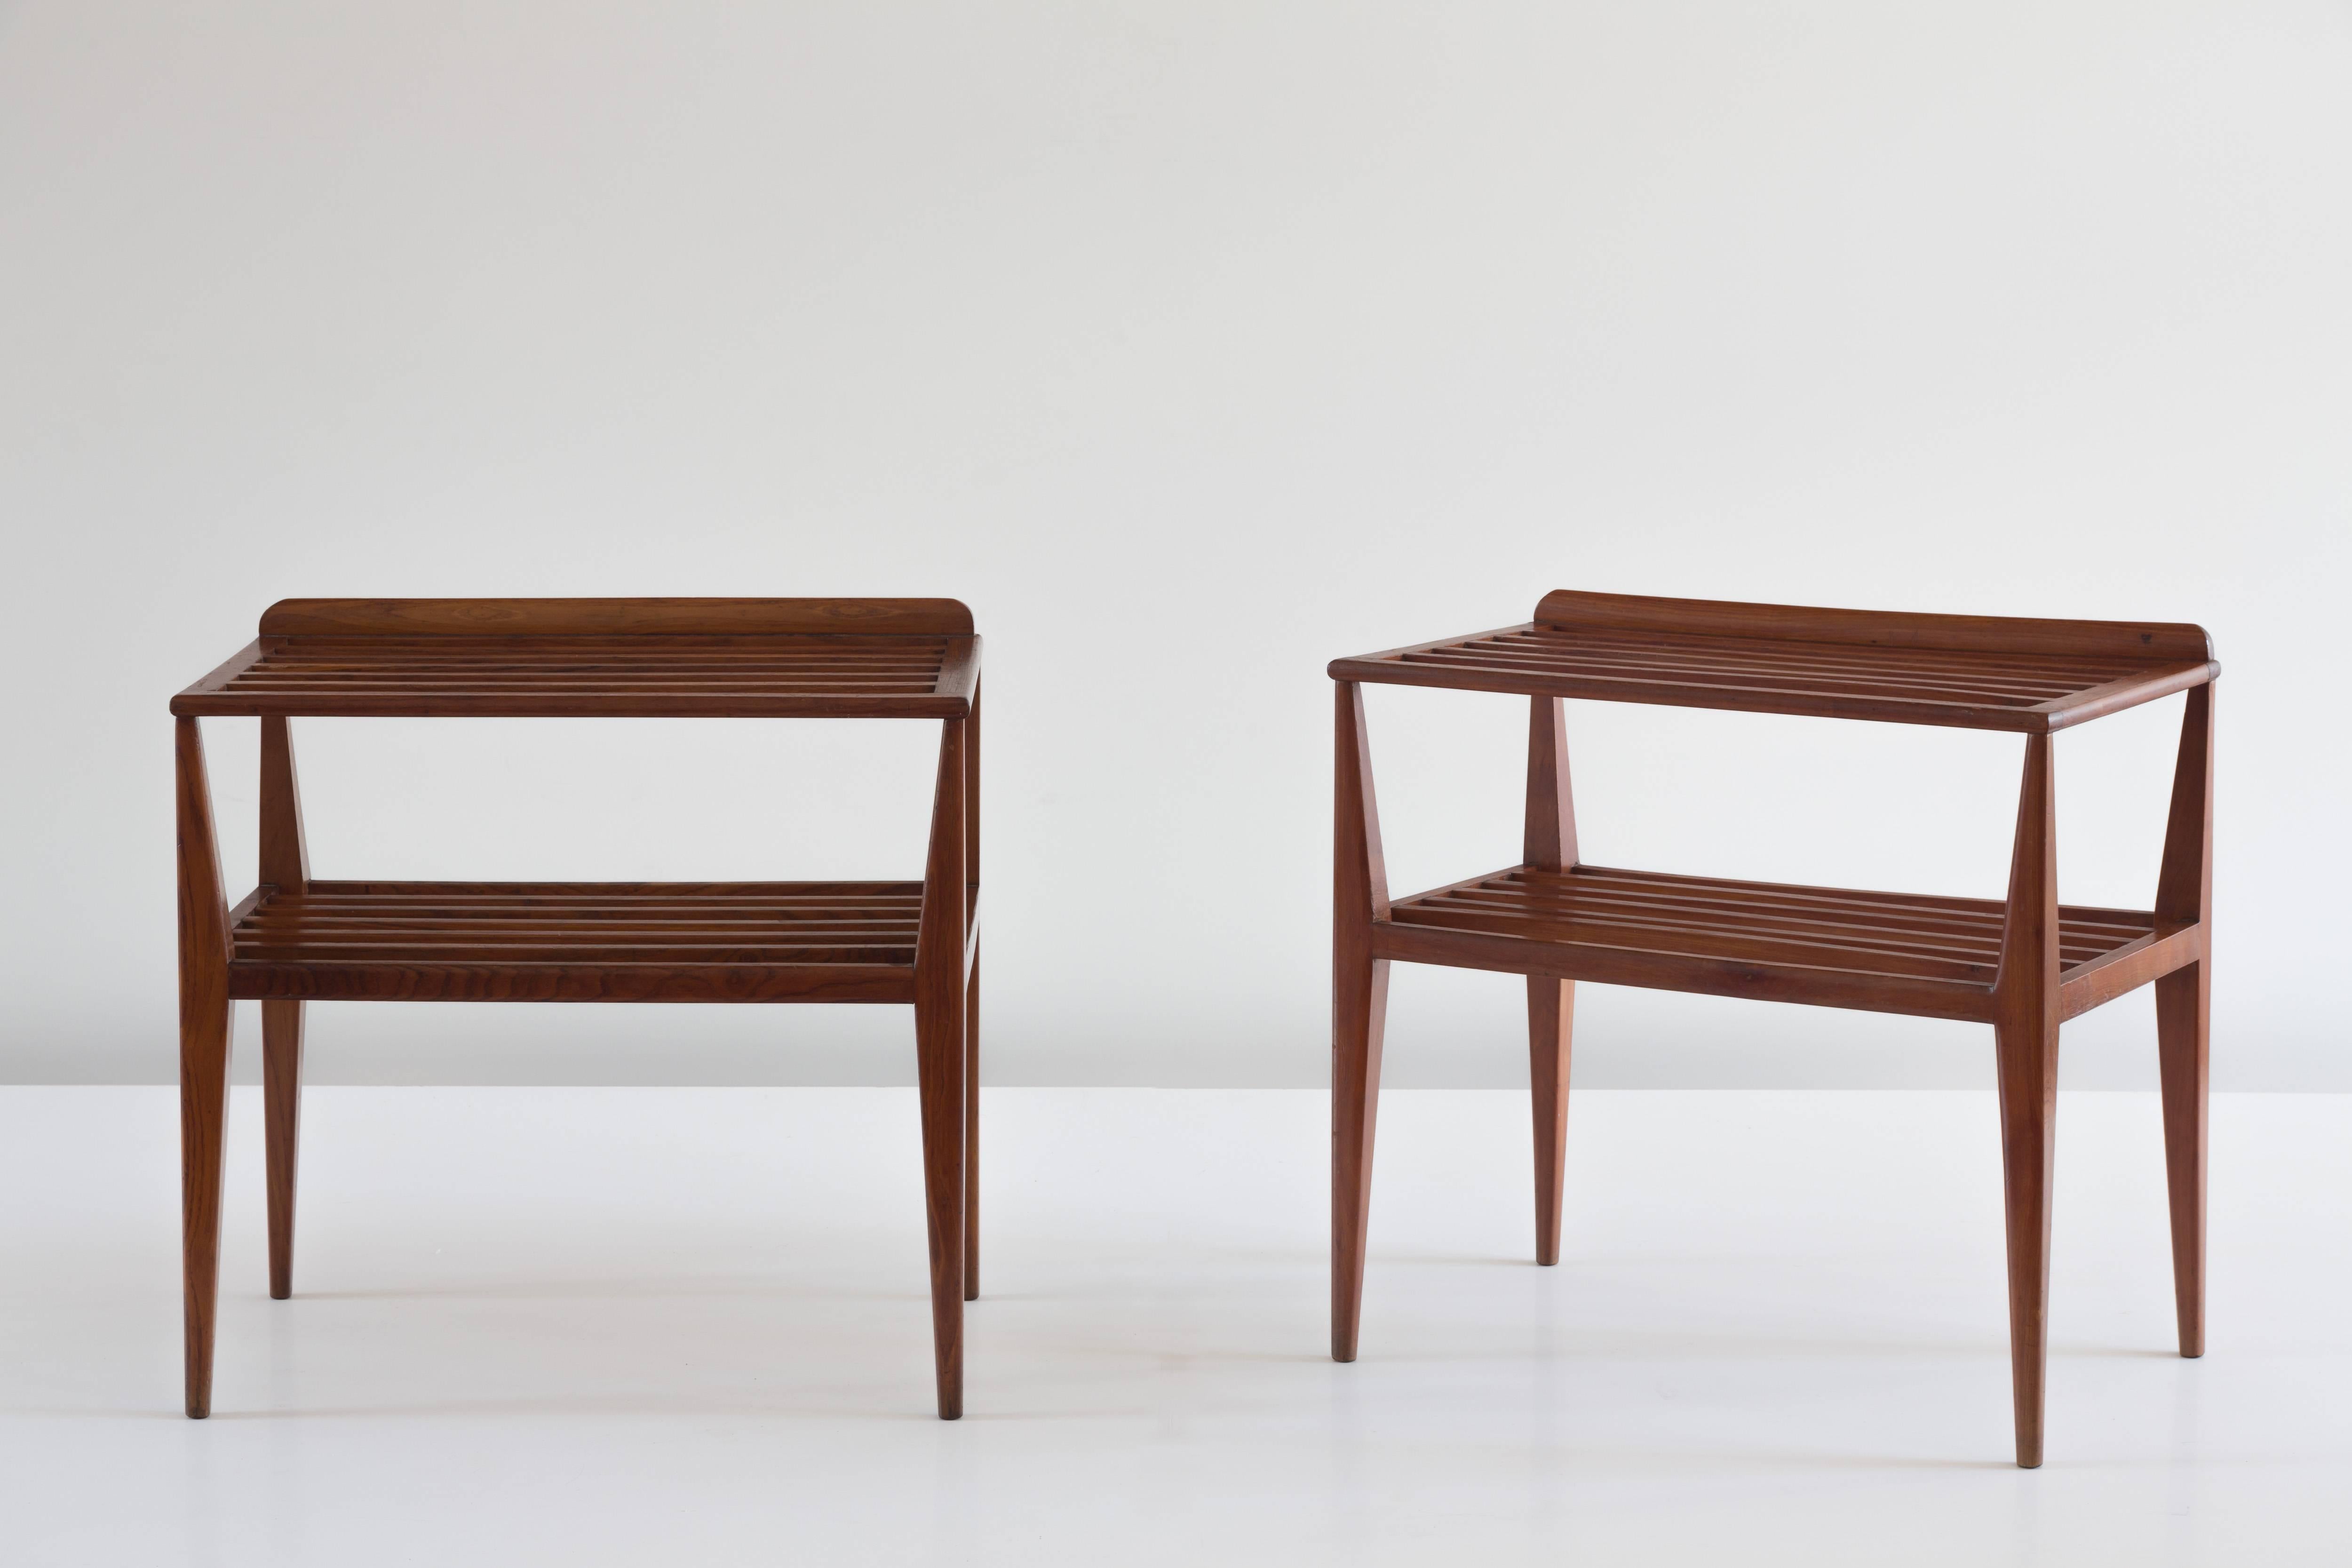 Rare pair of Gio Ponti nightstands, 1952.
Side tables designed by Arch Gio Ponti for a forniture of a Hotel Spa in center of Italy, 1952.
Sinuous legs, double shelf,
walnut 

Perfect condition. 
Measures: H 69 cm, 67 x 43 cm. 
Together with a